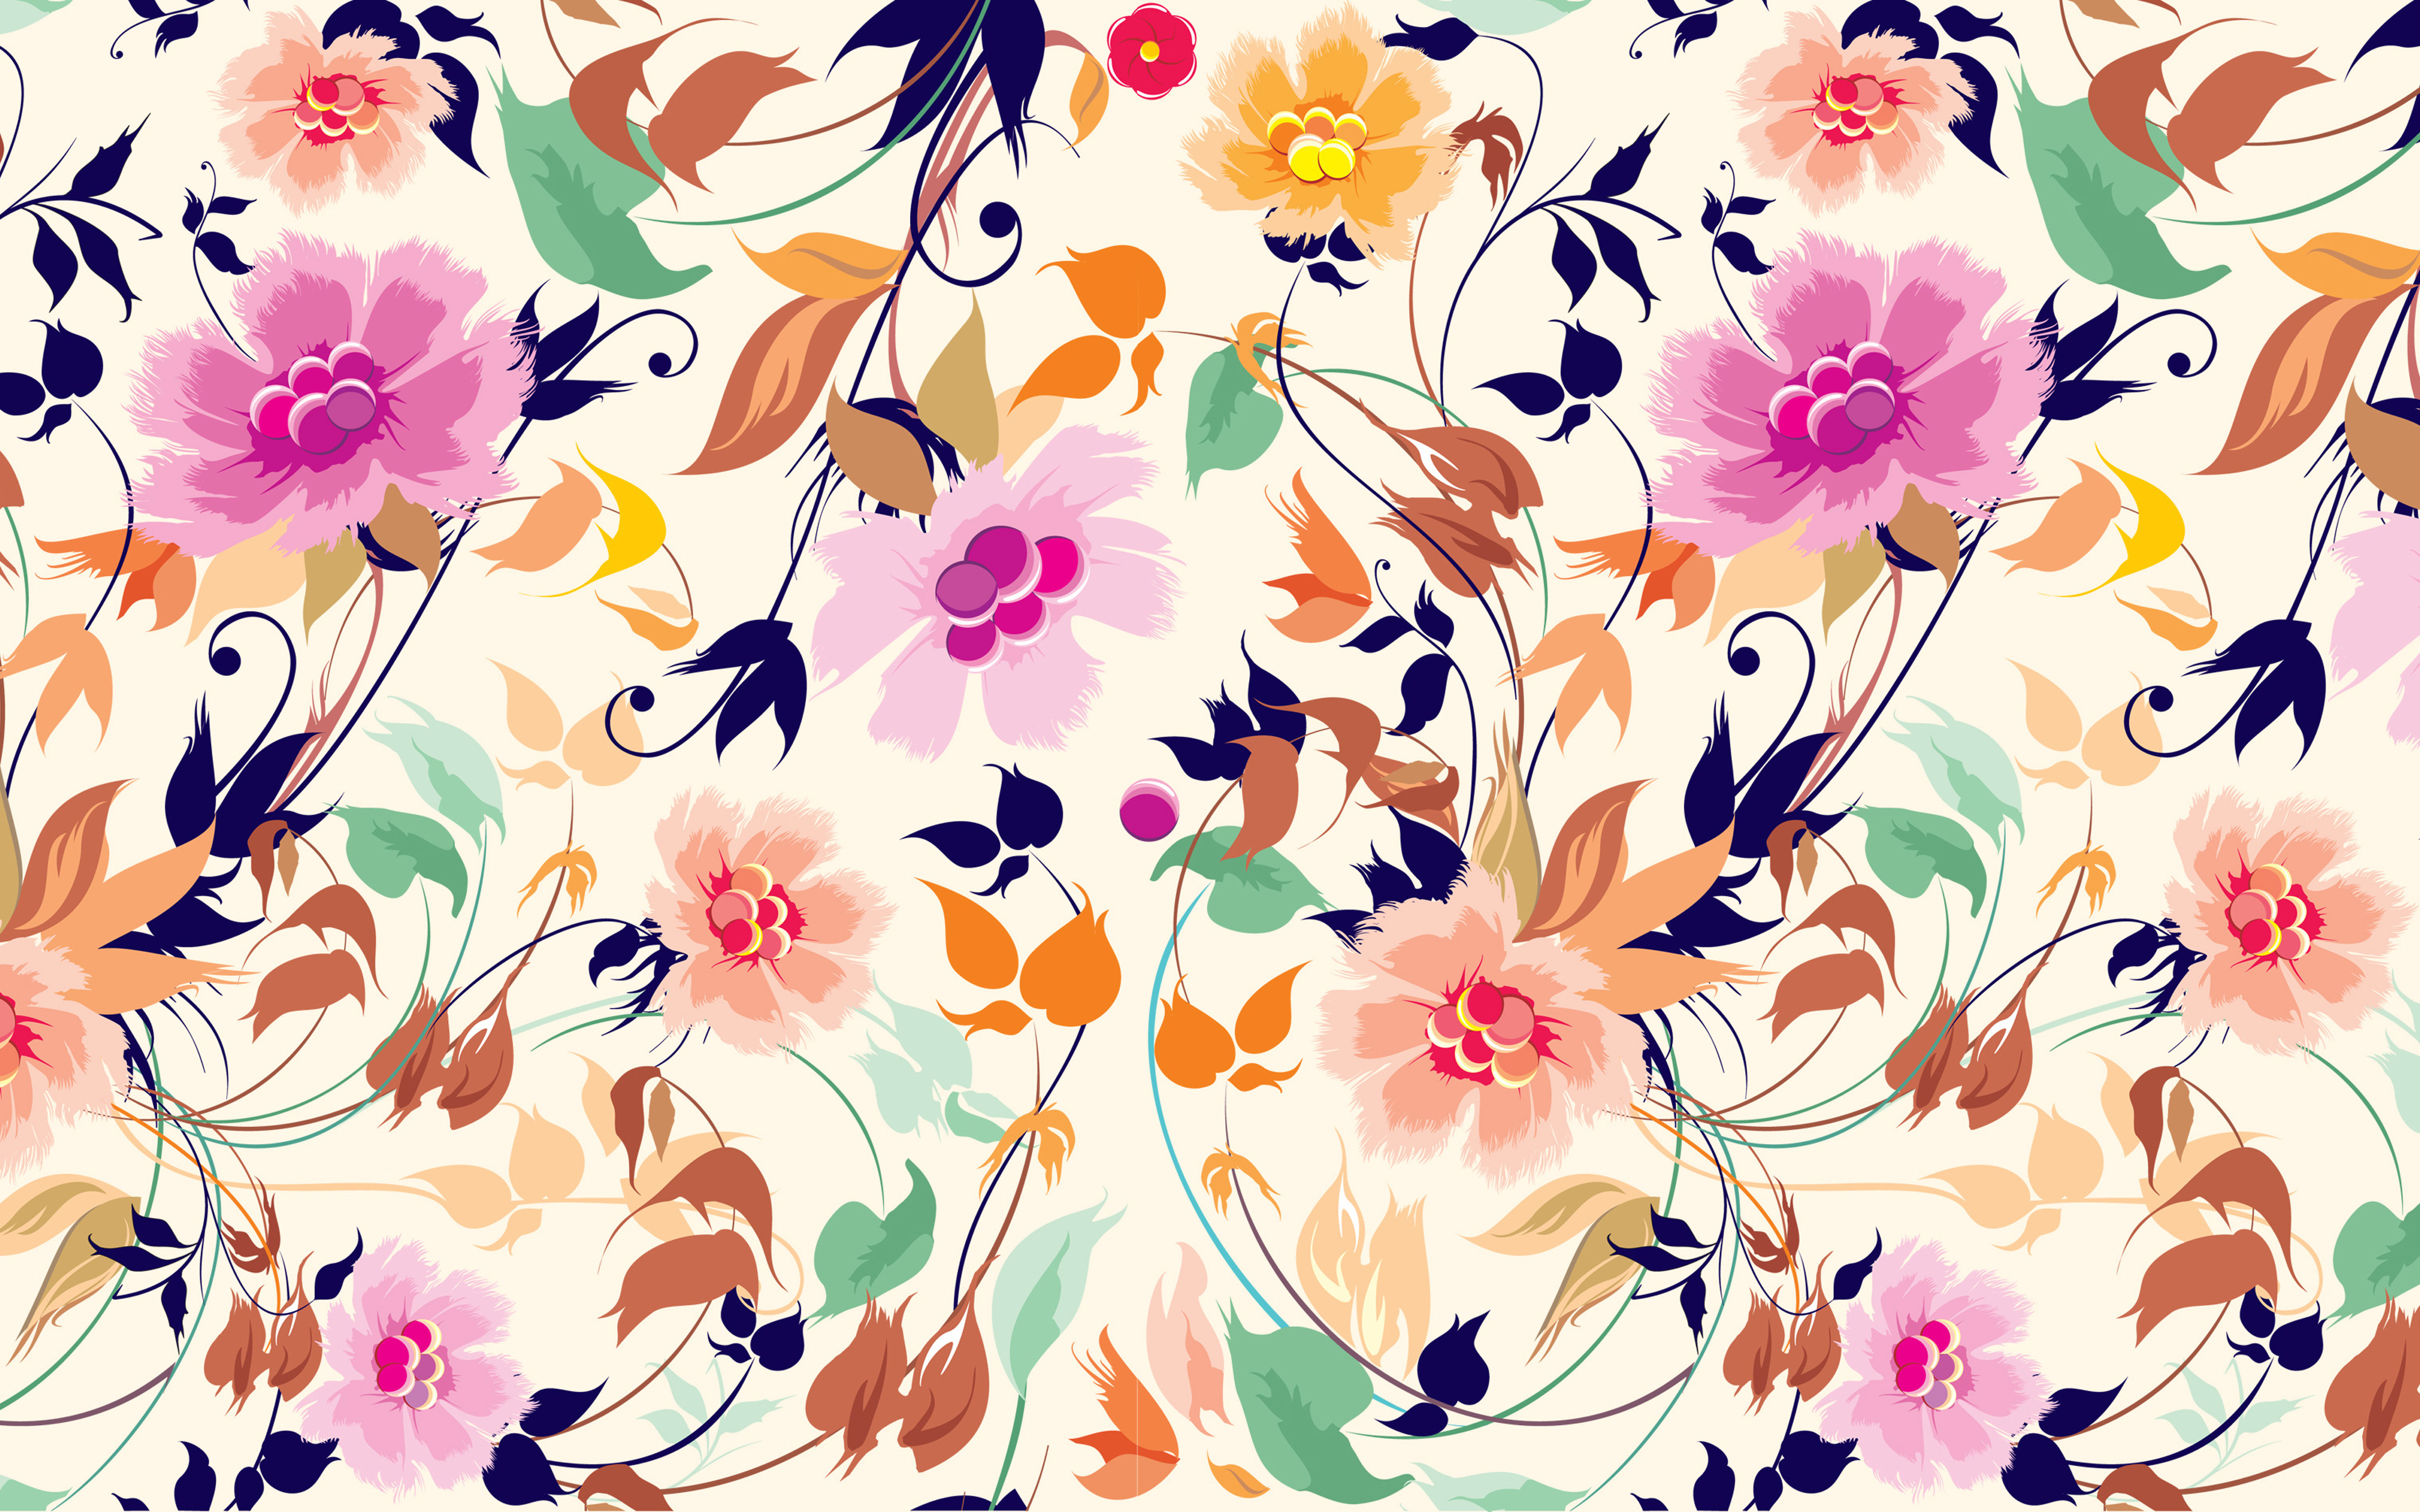 Free Hd Flowers Wallpapers Photos and Vectors